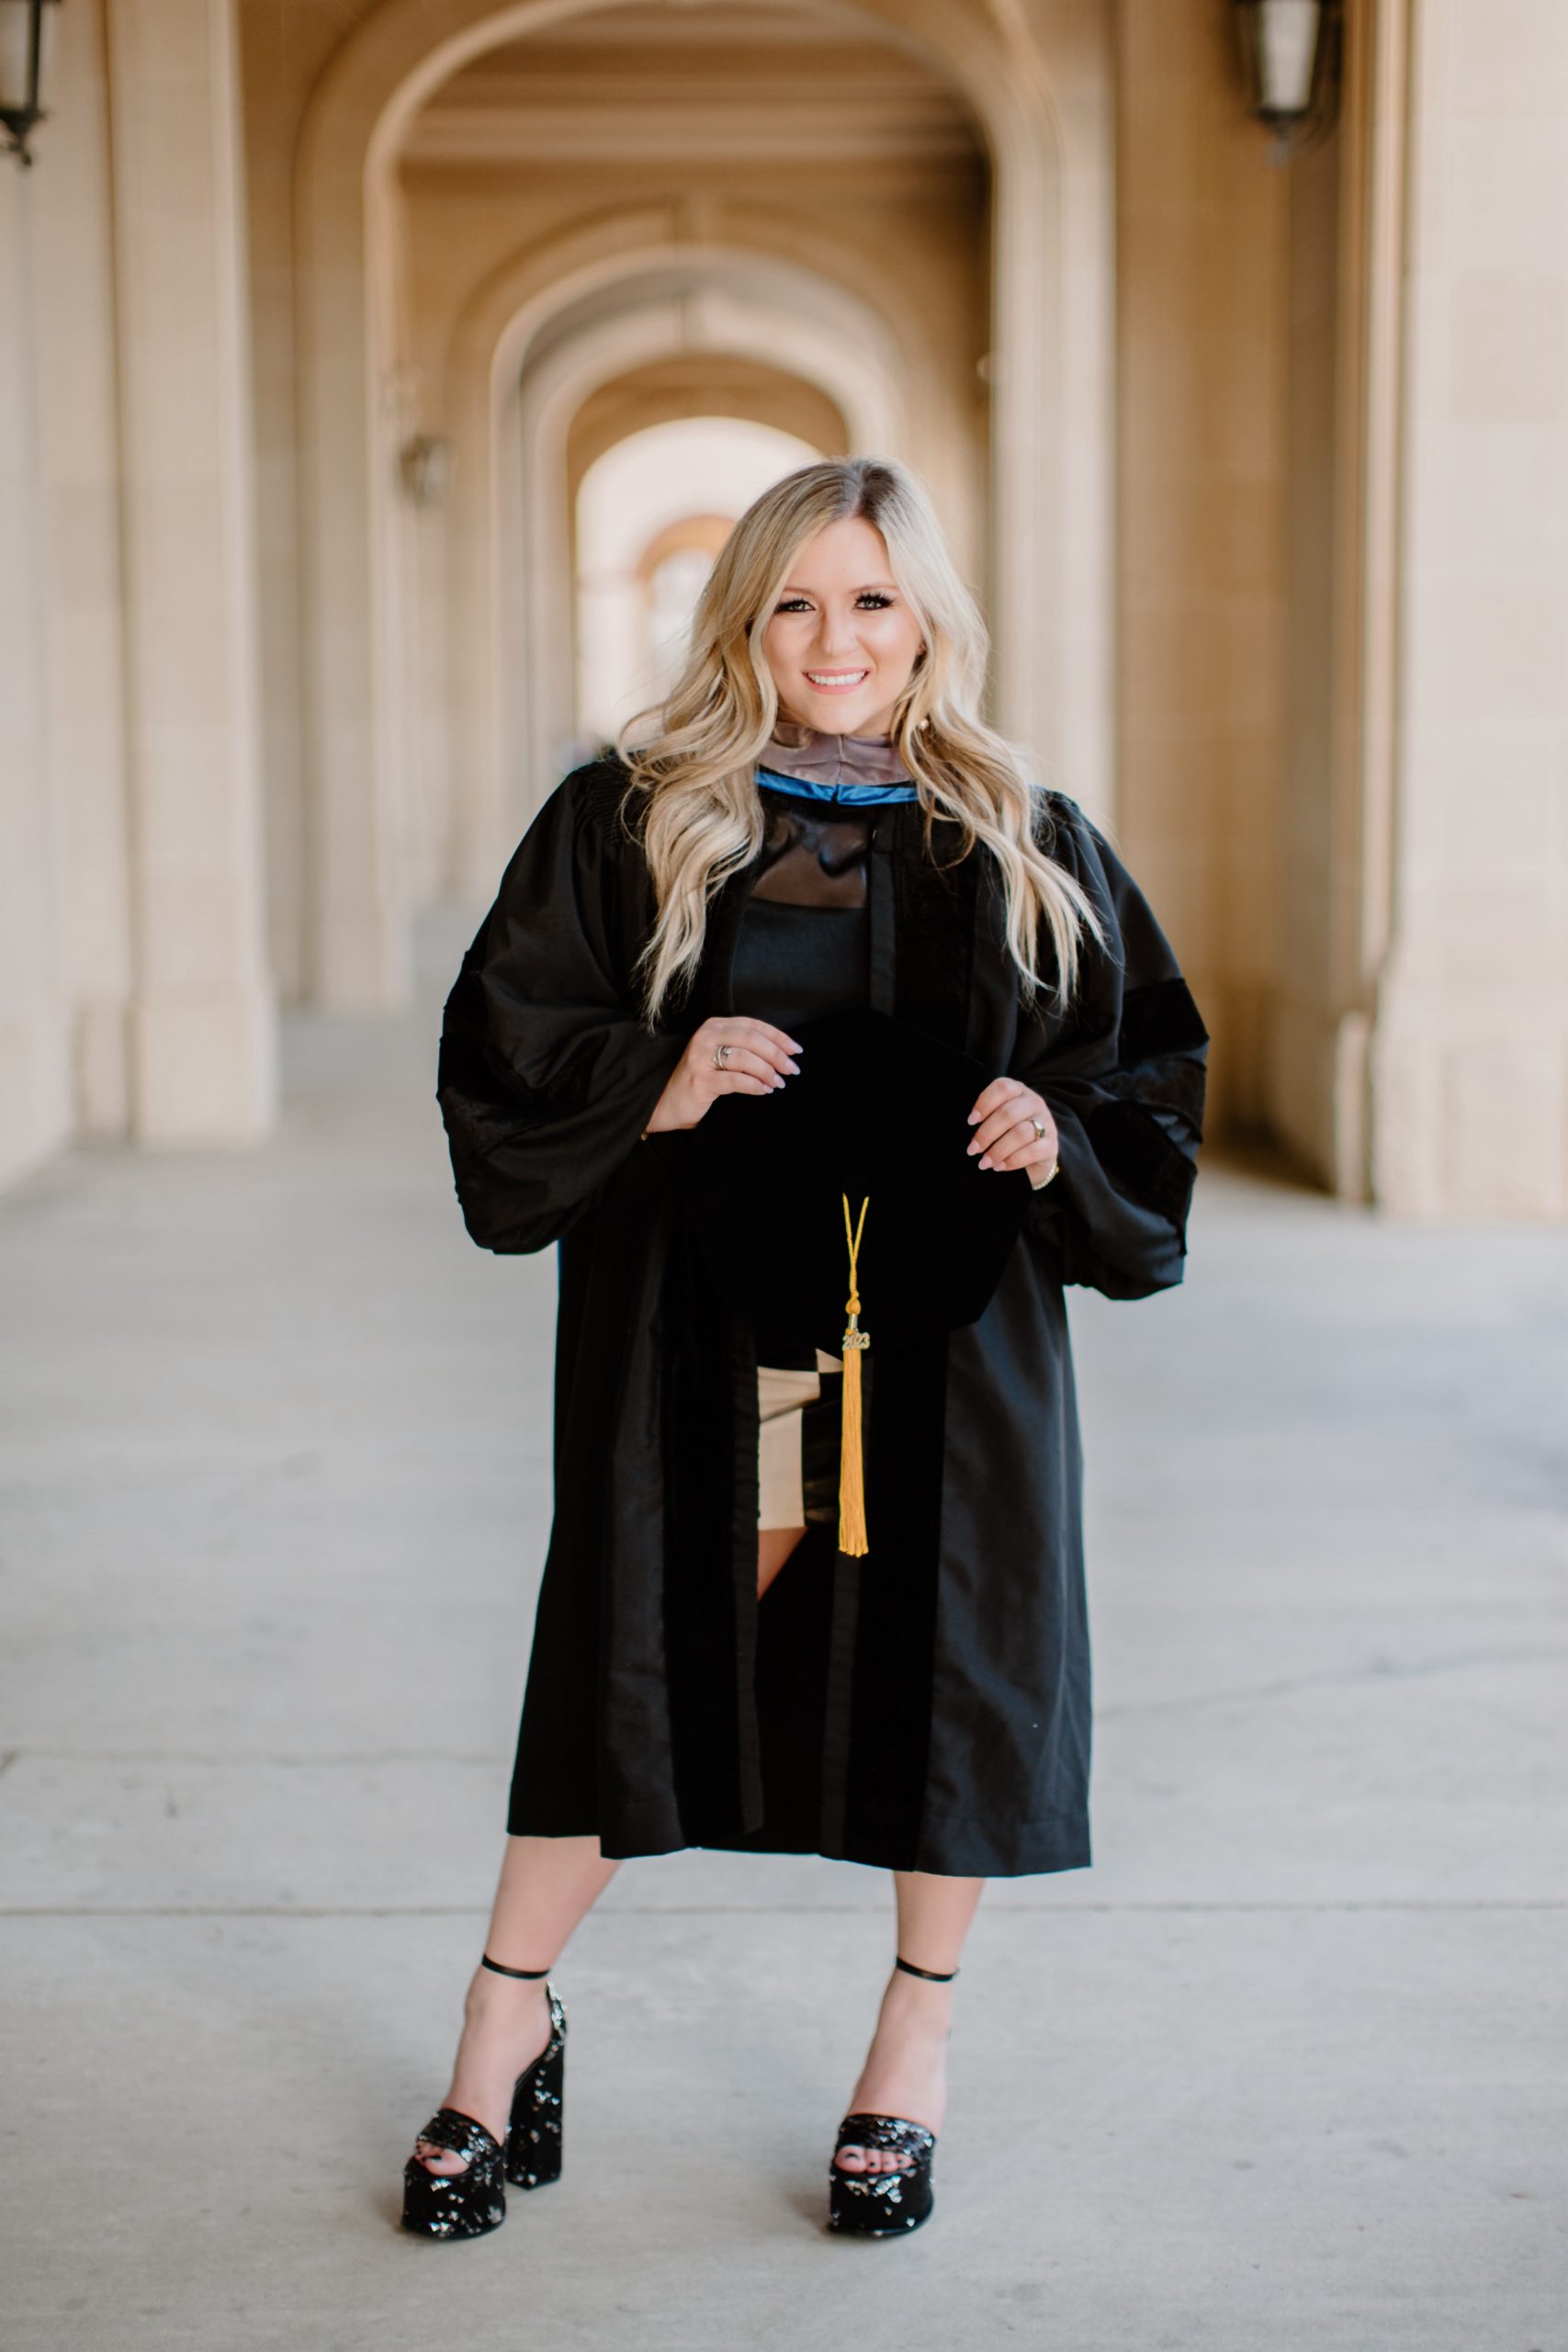 Dr. Kennedy Adams poses for a photo in her graduation gown.